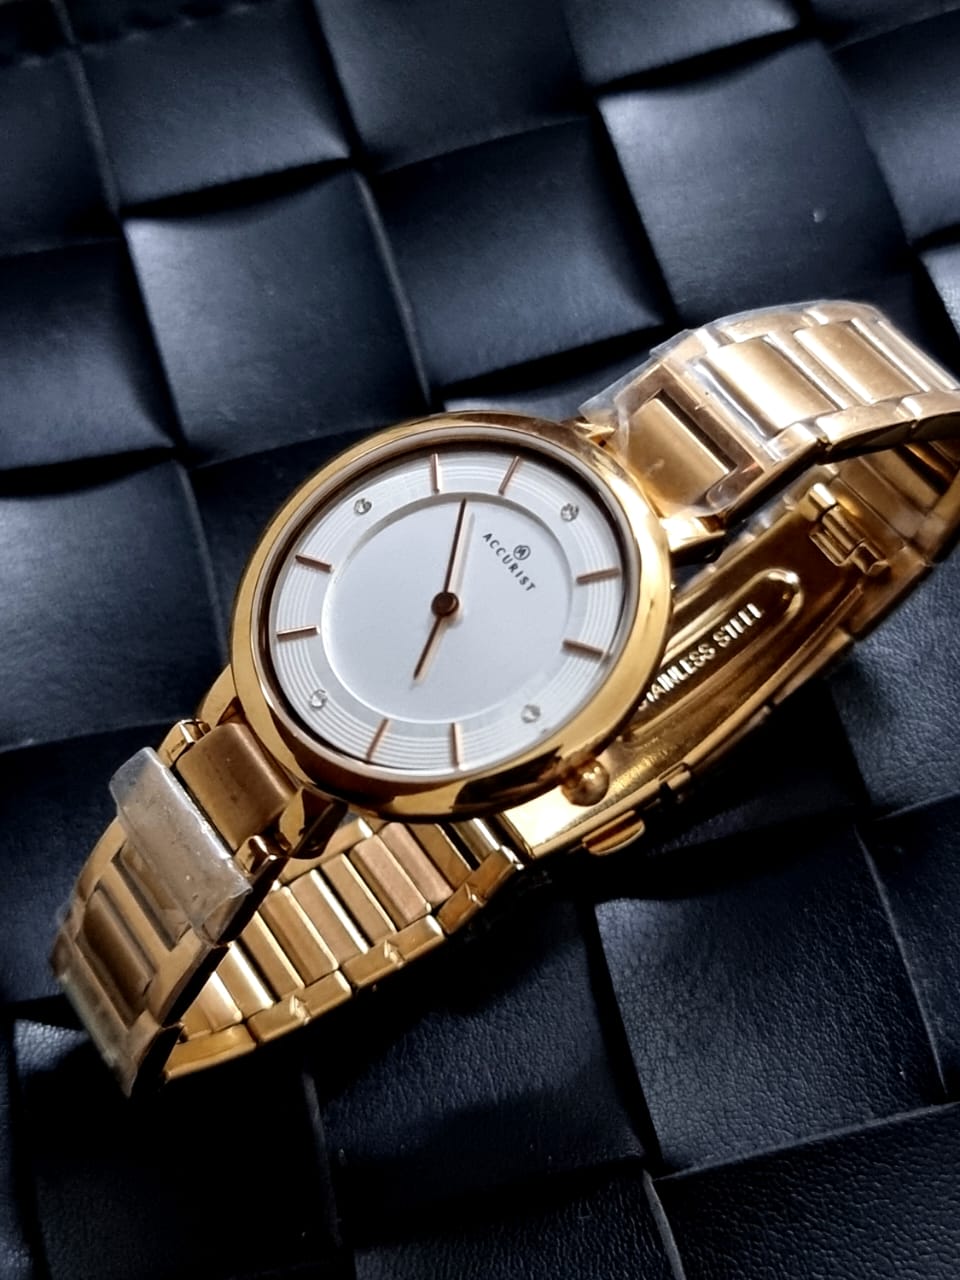 Accurate Ladies Watch Golden Chain